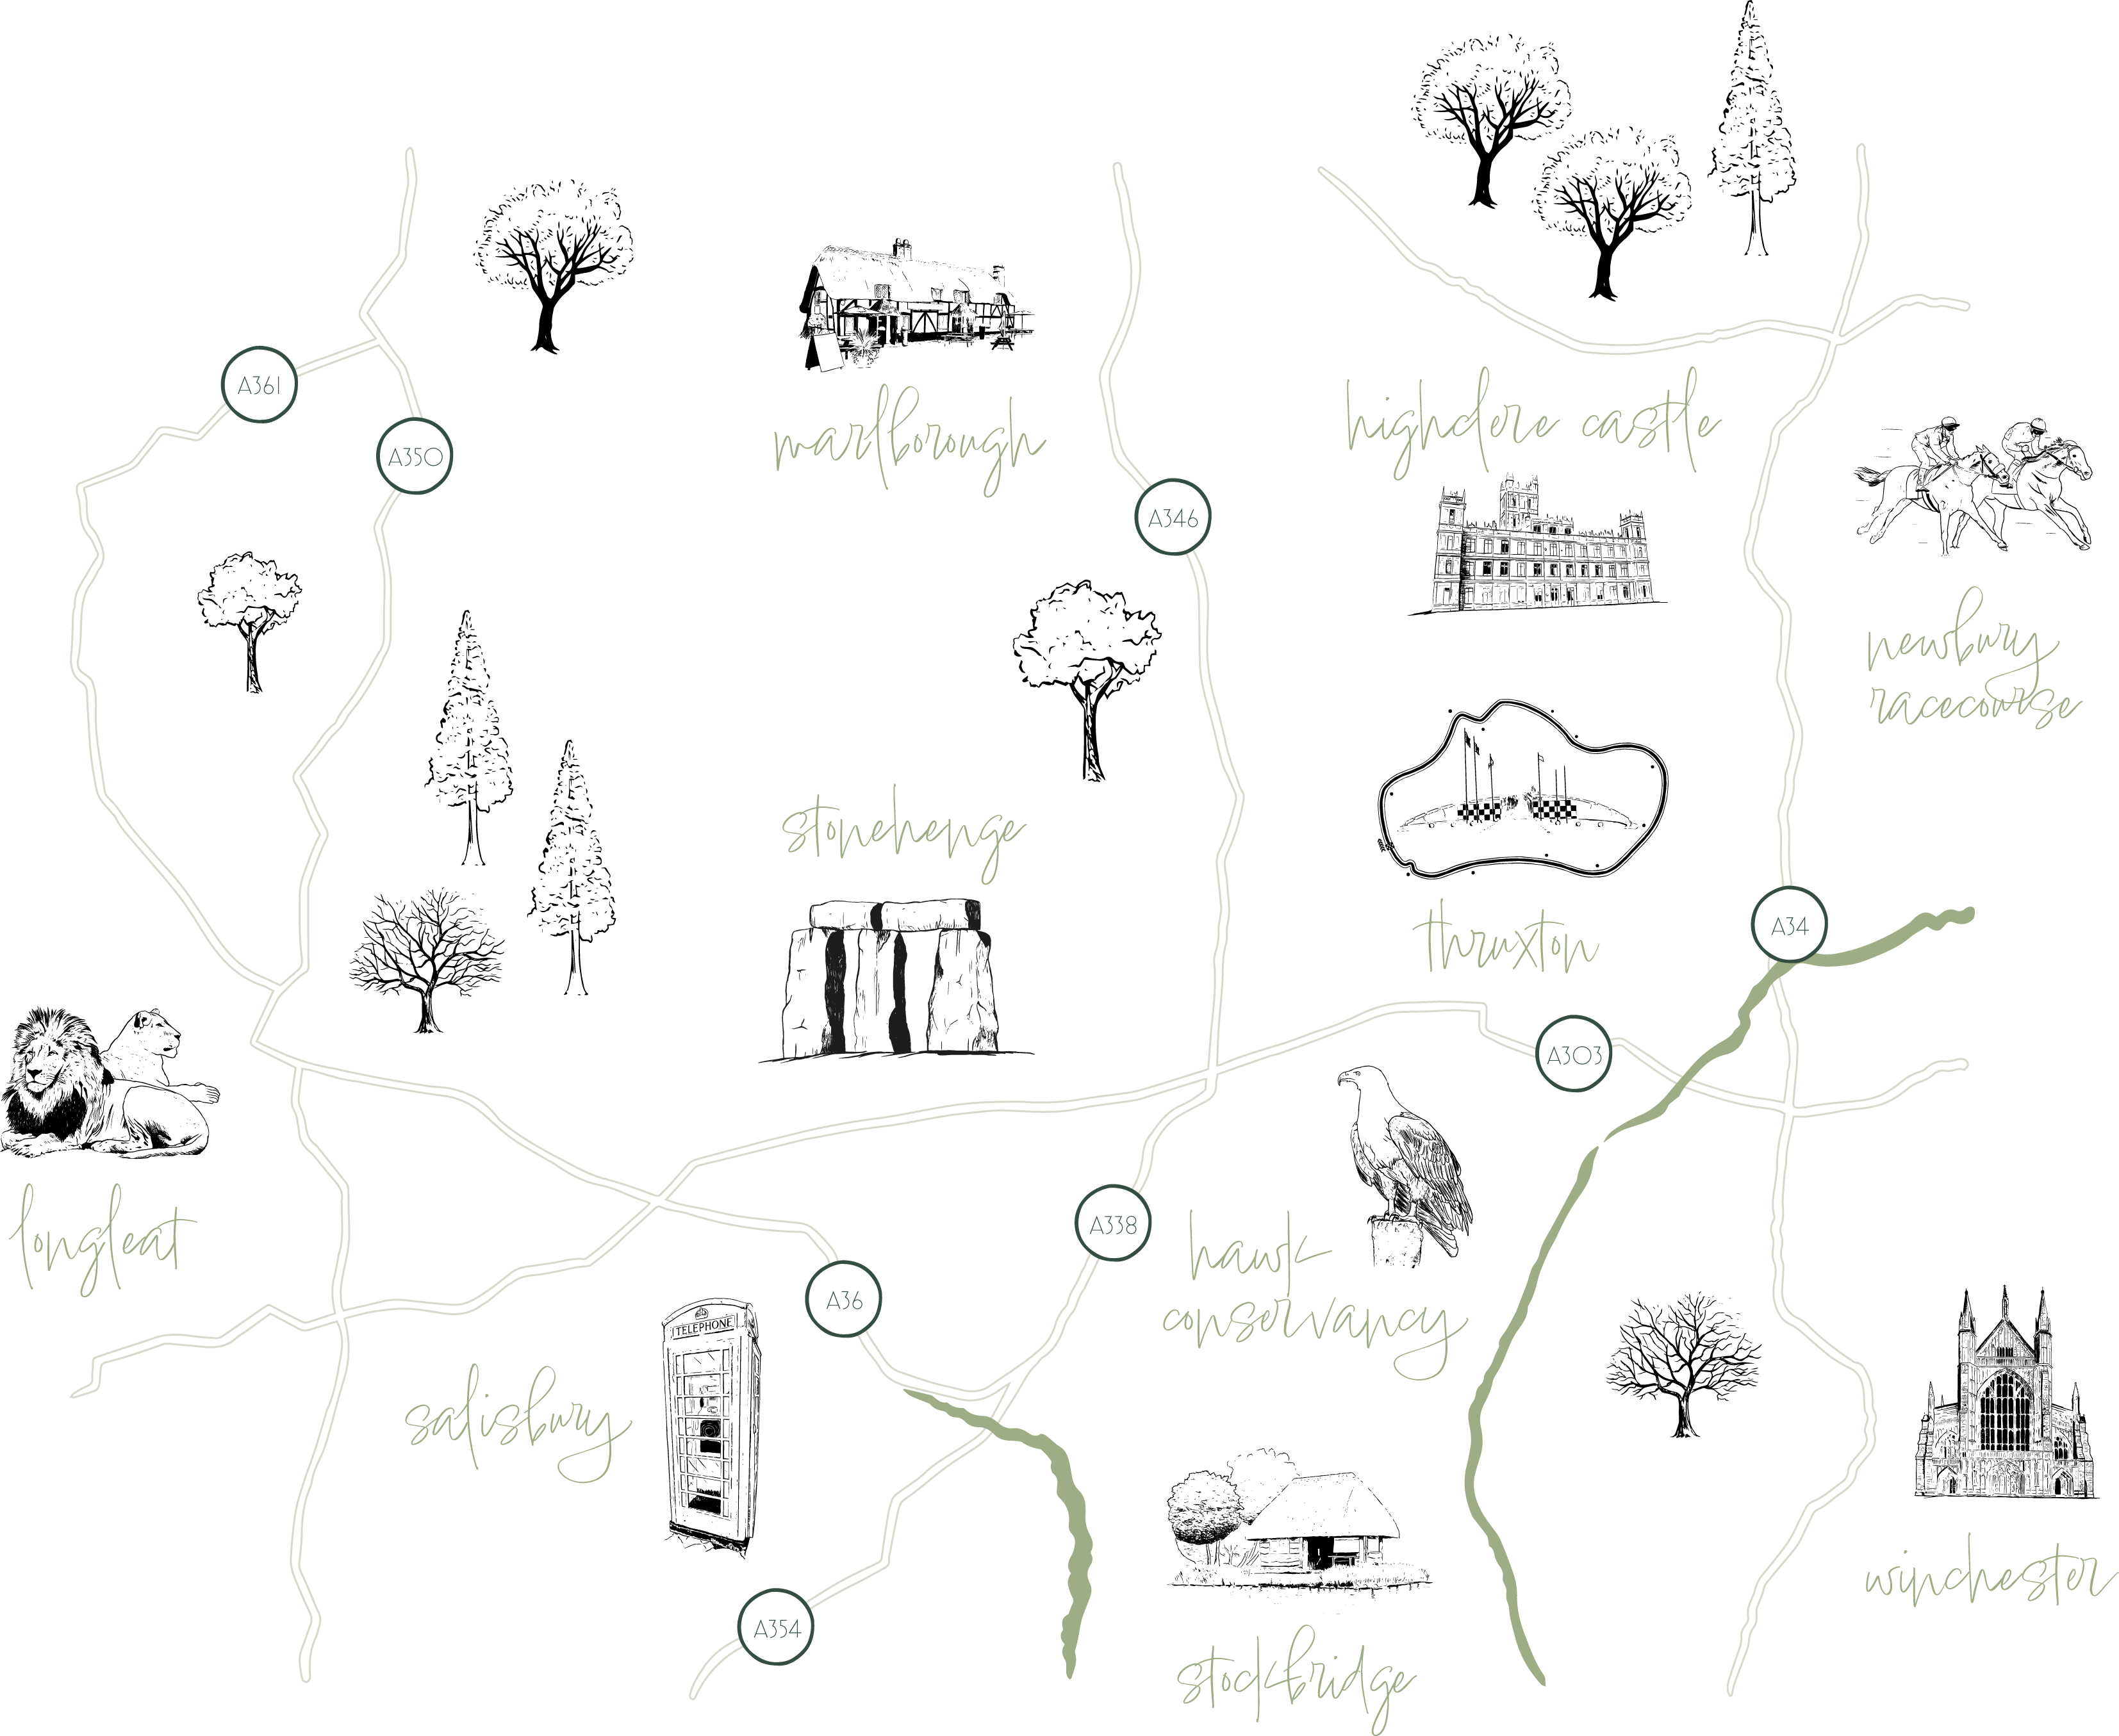 Local attractions map